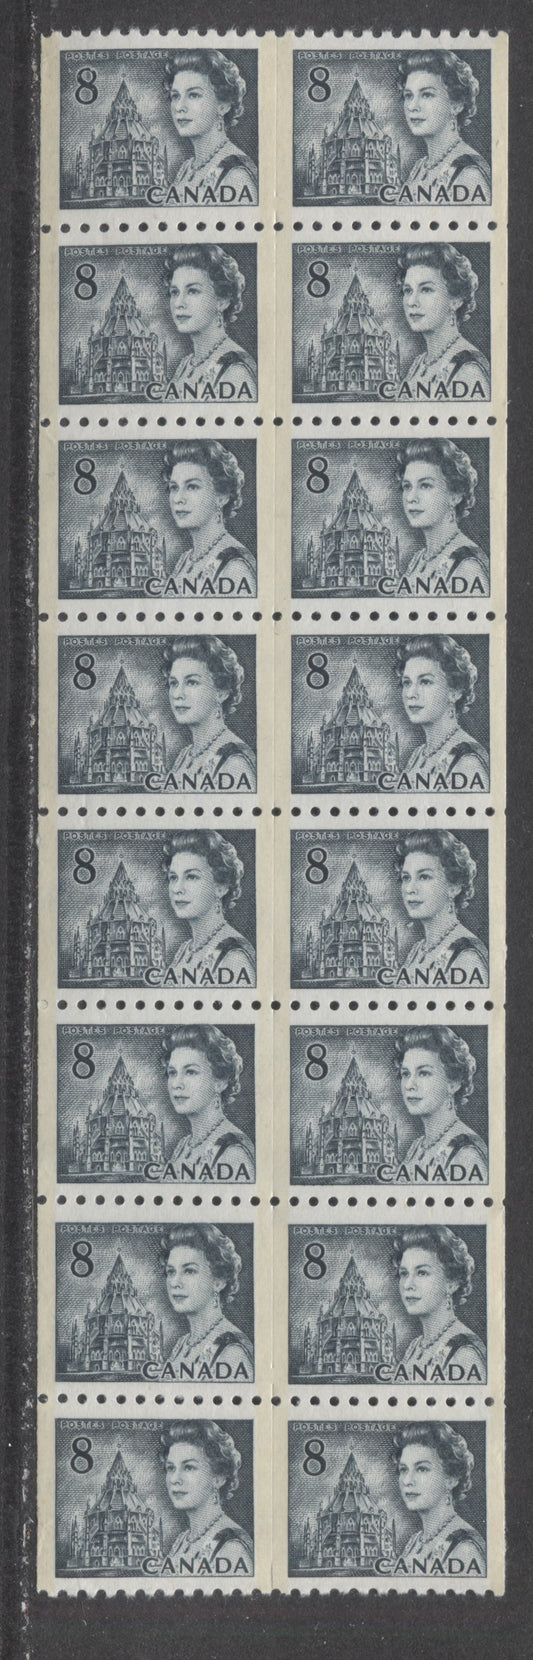 Lot 68 Canada #550piv 8c Slate Queen Elizabeth II, 1967-1973 Centennials, A VFNH GT2 Tagged Unsevered Coil Block Of 16 On White MF6-fl Paper With PVA Gum, 3mm GT2 Tagged